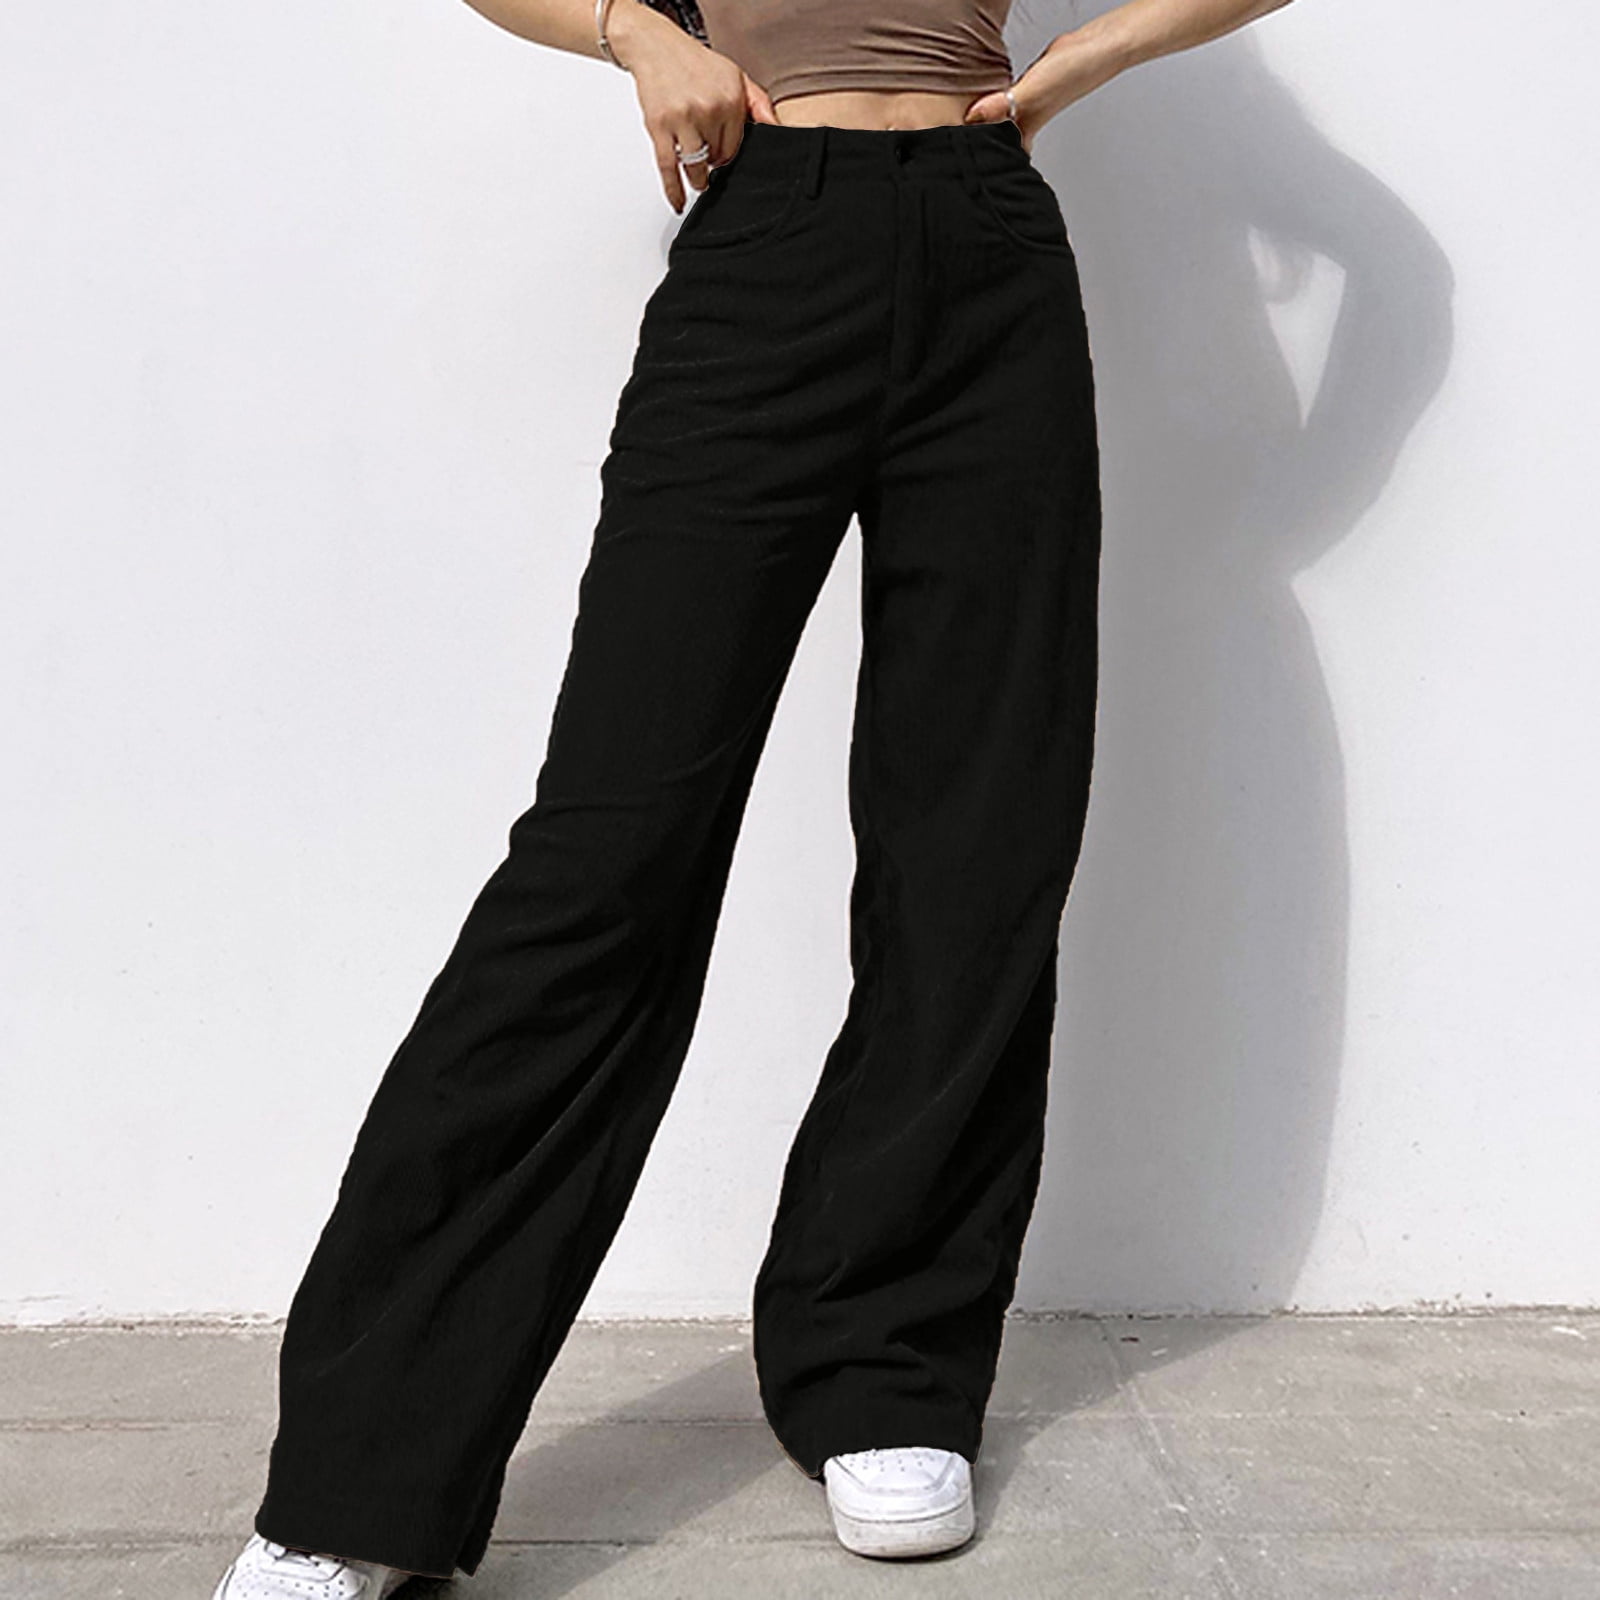 Buy Tokyo Talkies Black Wide Leg Stretchable Jeans For, 50% OFF